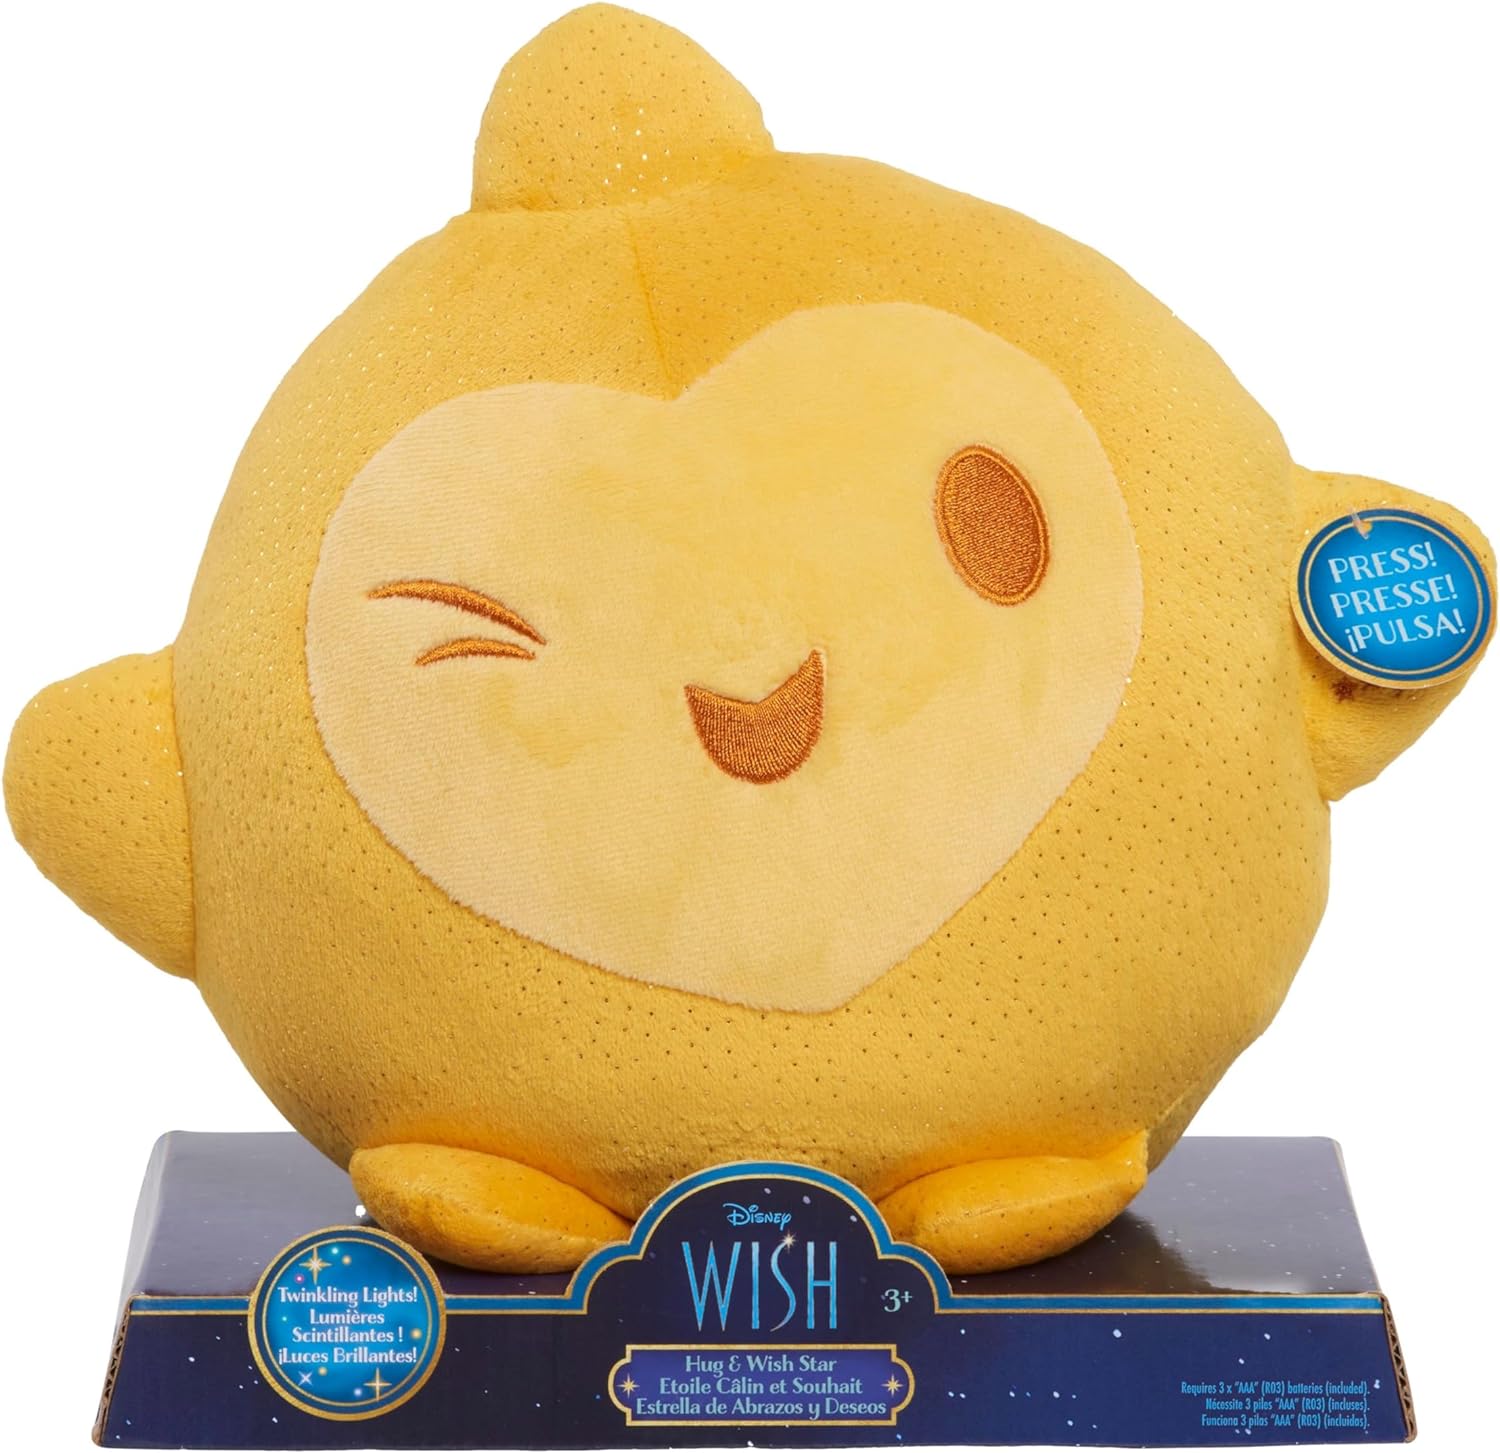 Disney Wish Hug & Wish Star 10-Inch Glowing Plush Star, Soothing Night Light, Officially Licensed Kids Toys for Ages 3 Up by Just Play